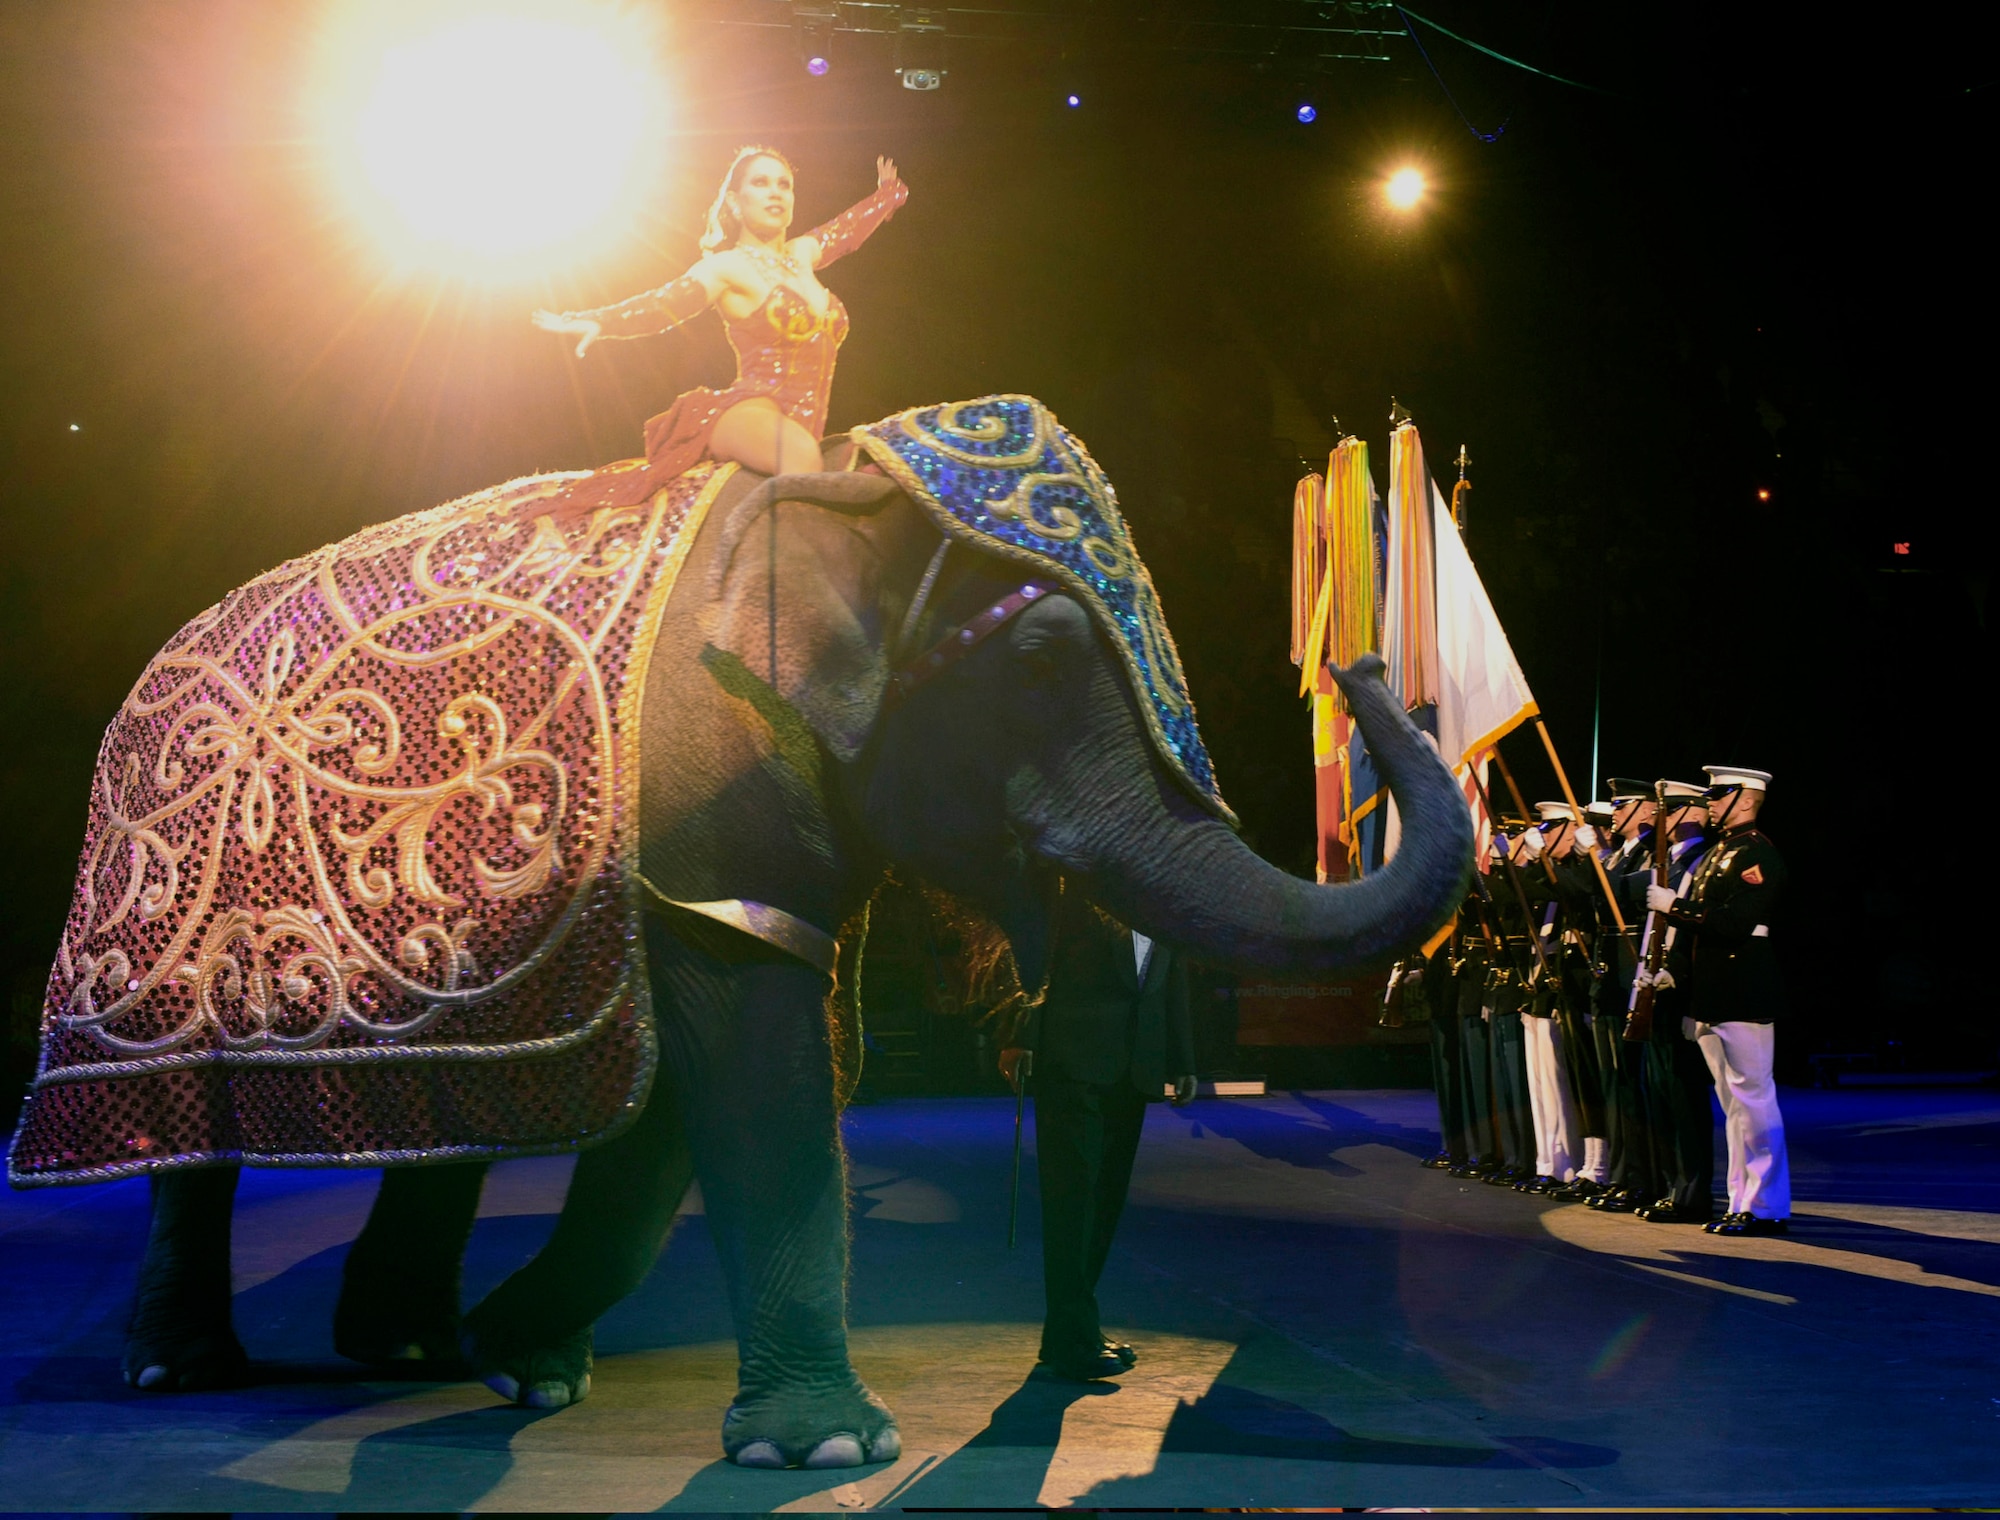 The Military District of Washington's Joint Color Guard present the flags as a two ton Asian elephant helps open the Ringling Bros. and Barnum & Bailey "Zing Zang Zoom" circus performance March 26, 2010, at George Mason University's Patriot Center in Fairfax, Va. This particular performance was in honor of military families worldwide.  (U.S. Air Force photo/Jim Varhegyi)